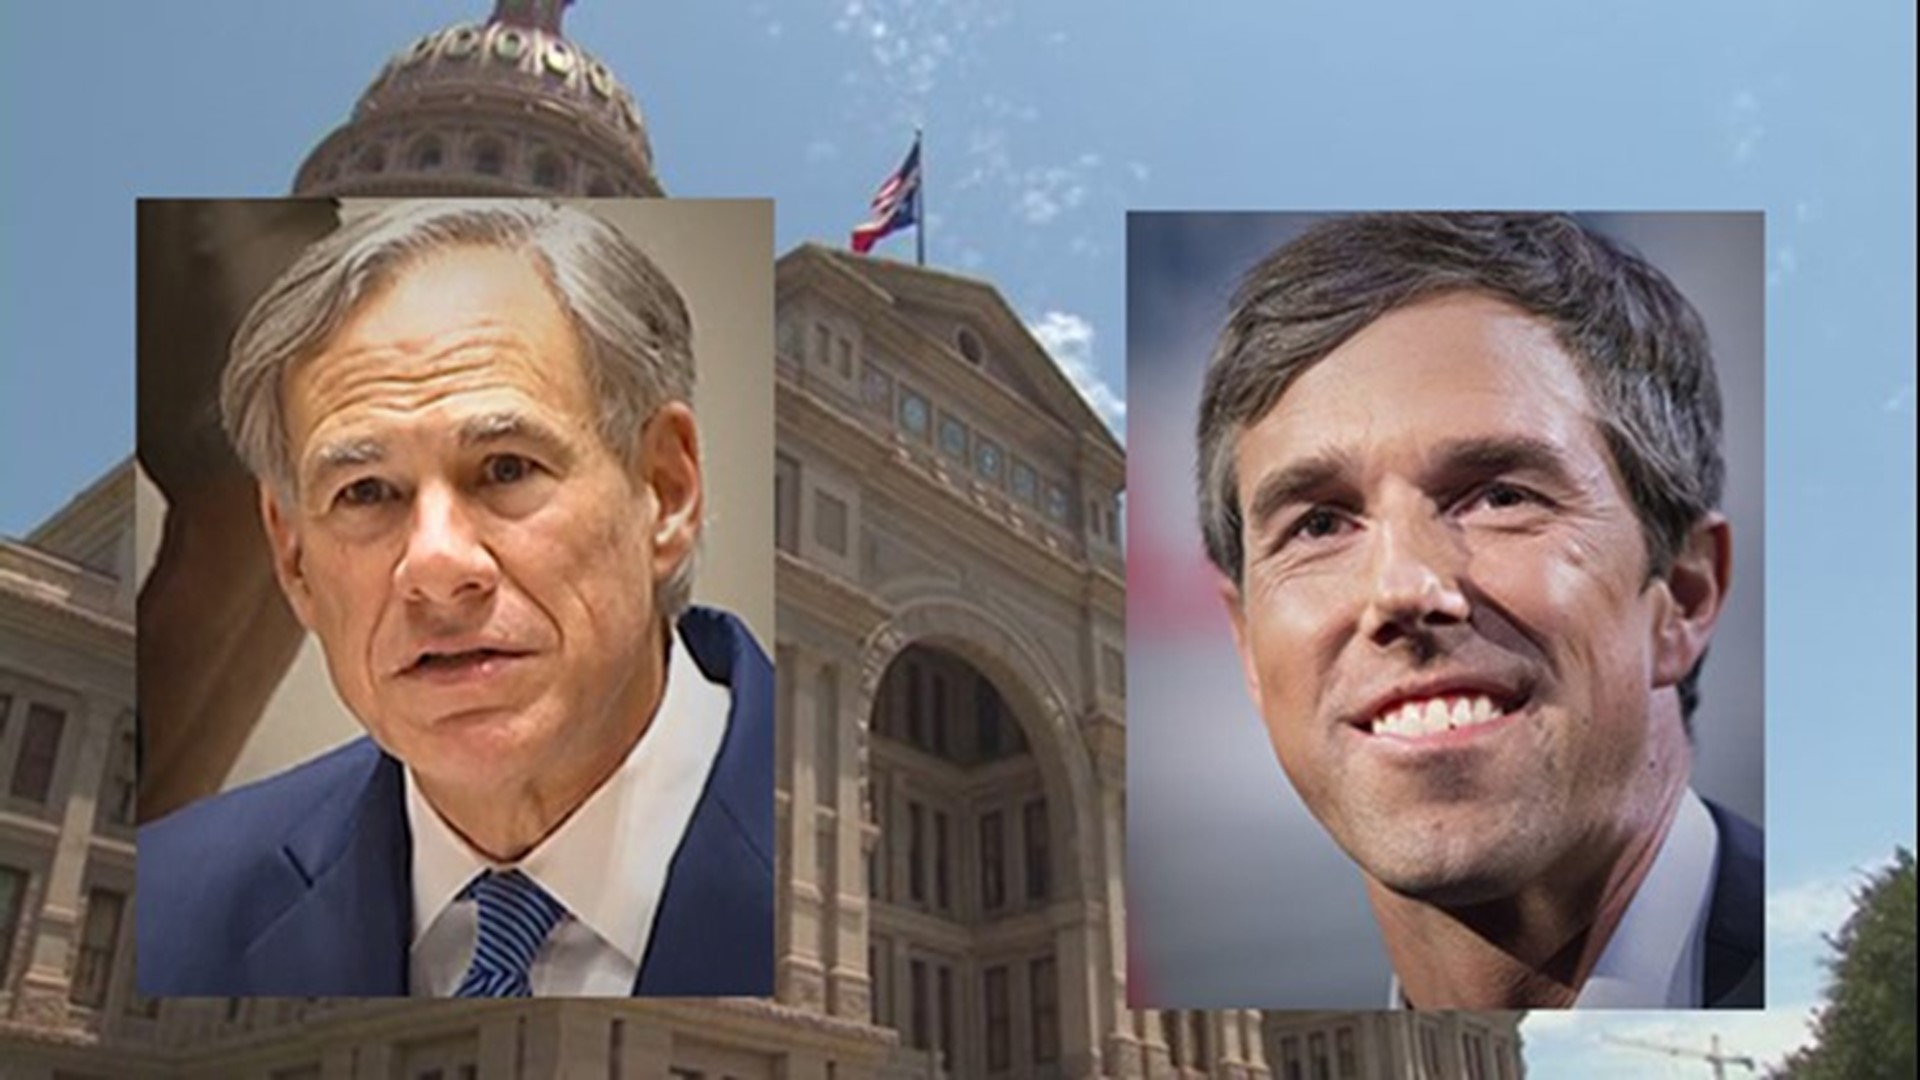 A recent University of Houston poll shows incumbent Republican Gov. Greg Abbott leads Democratic challenger Beto O’Rourke by five points.